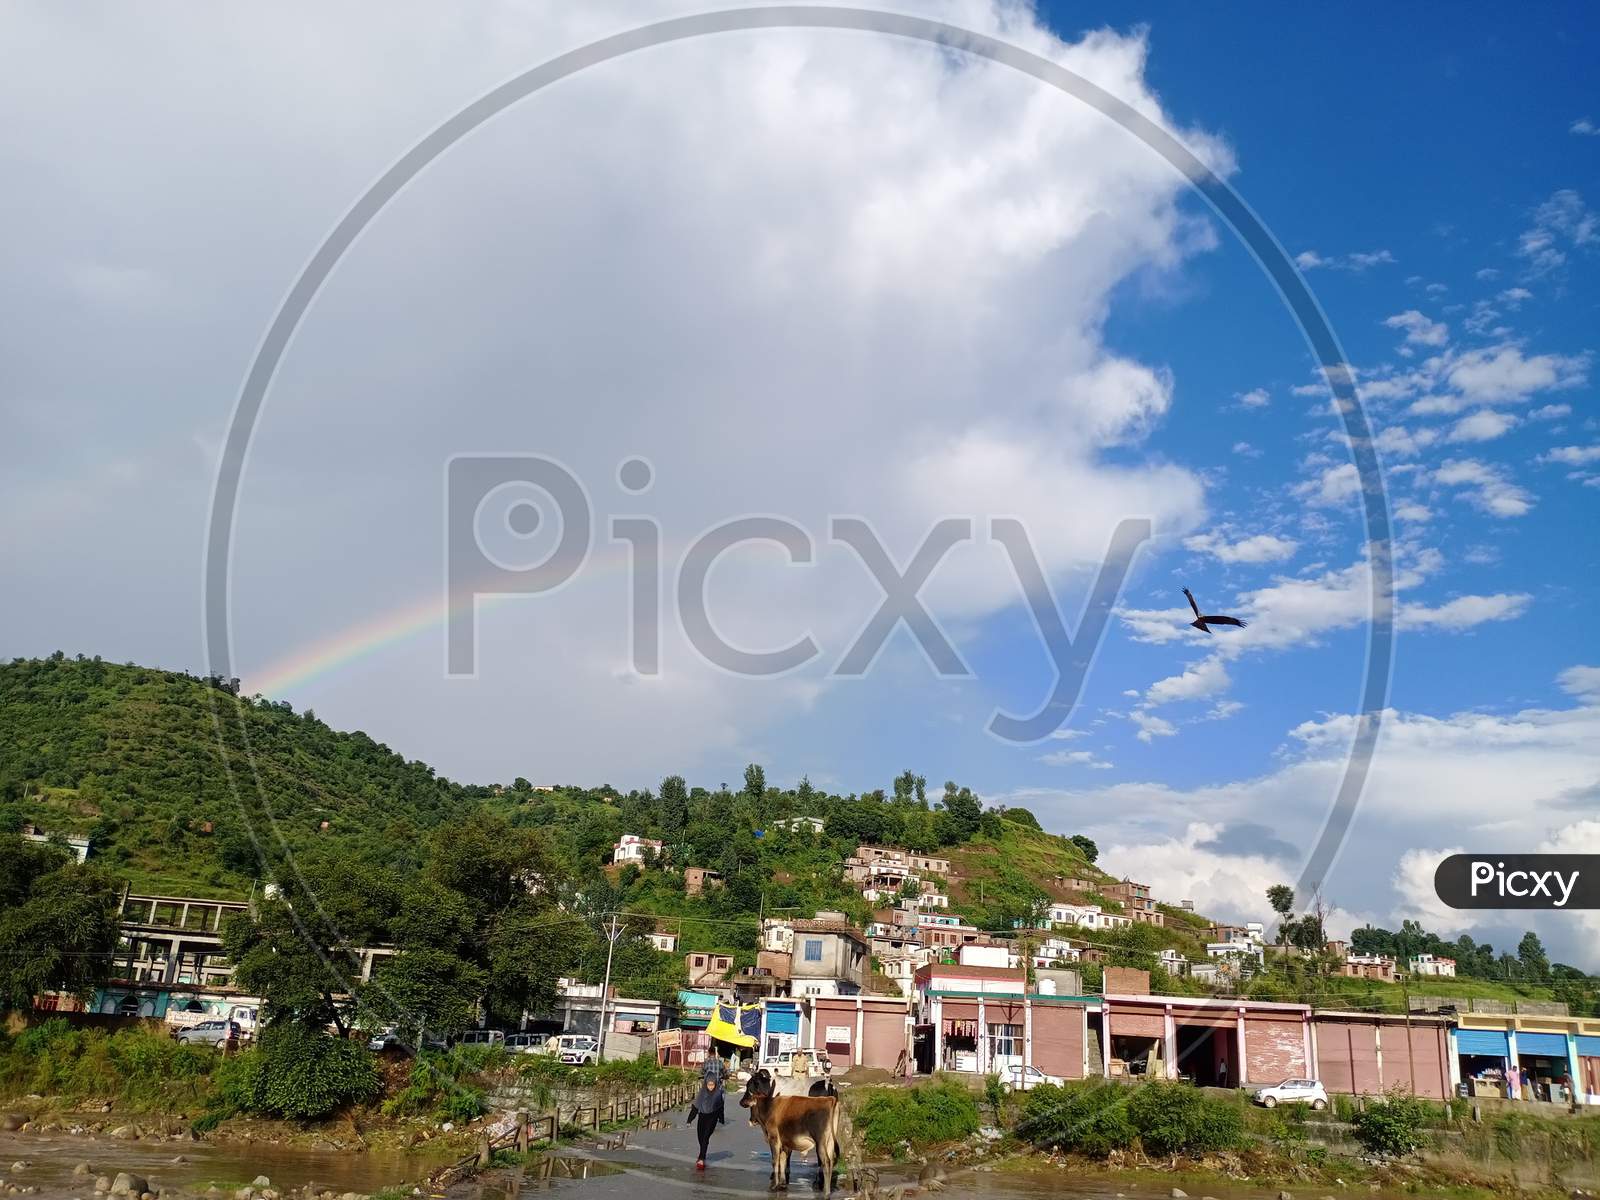 A rainbow appears on the landscape amidst scattered clouds after brief showers in Mendhar of Poonch district in Jammu and Kashmir